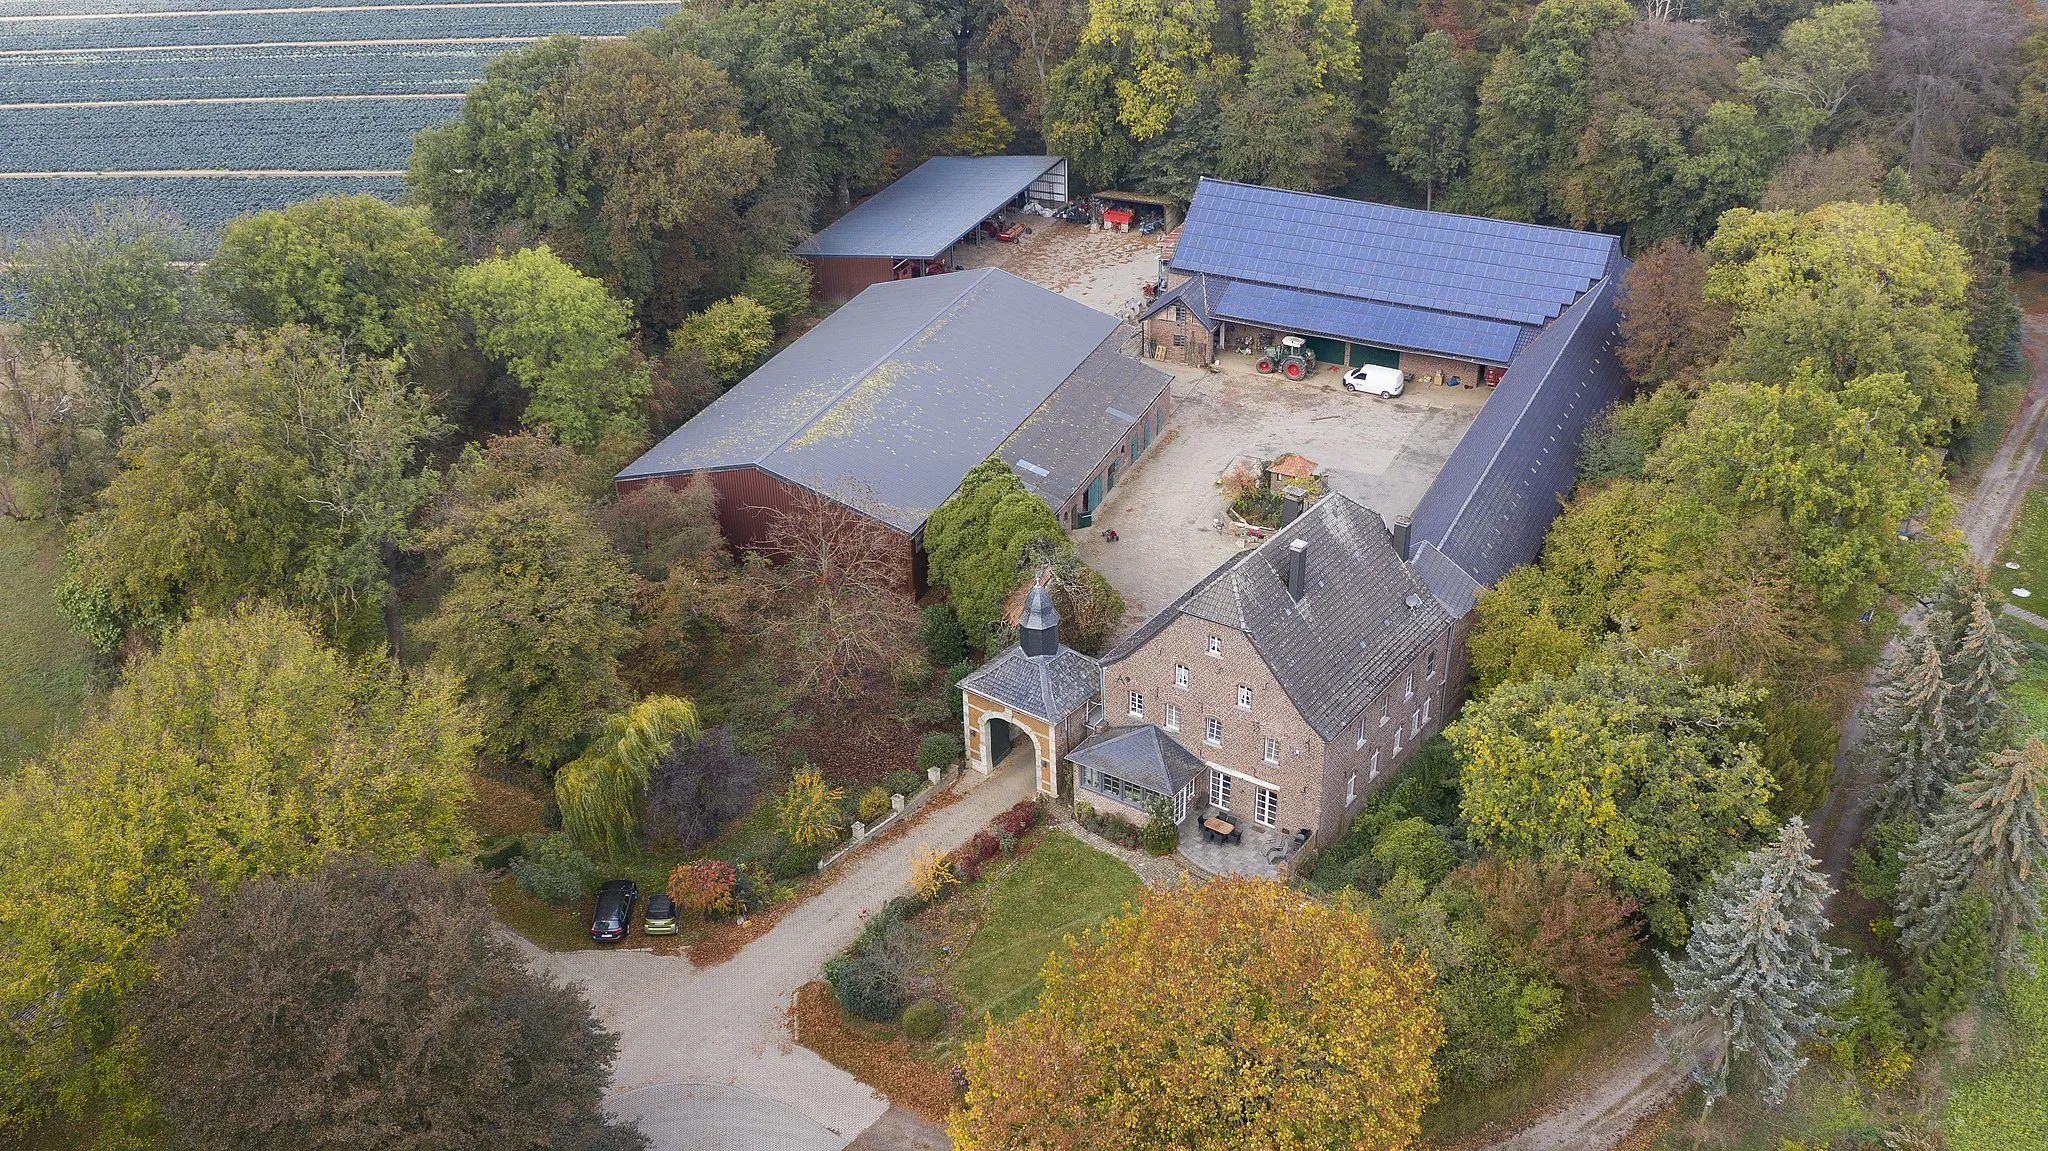 Photo showing: Aerial view of Eggerather Hof, Erkelenz, Germany